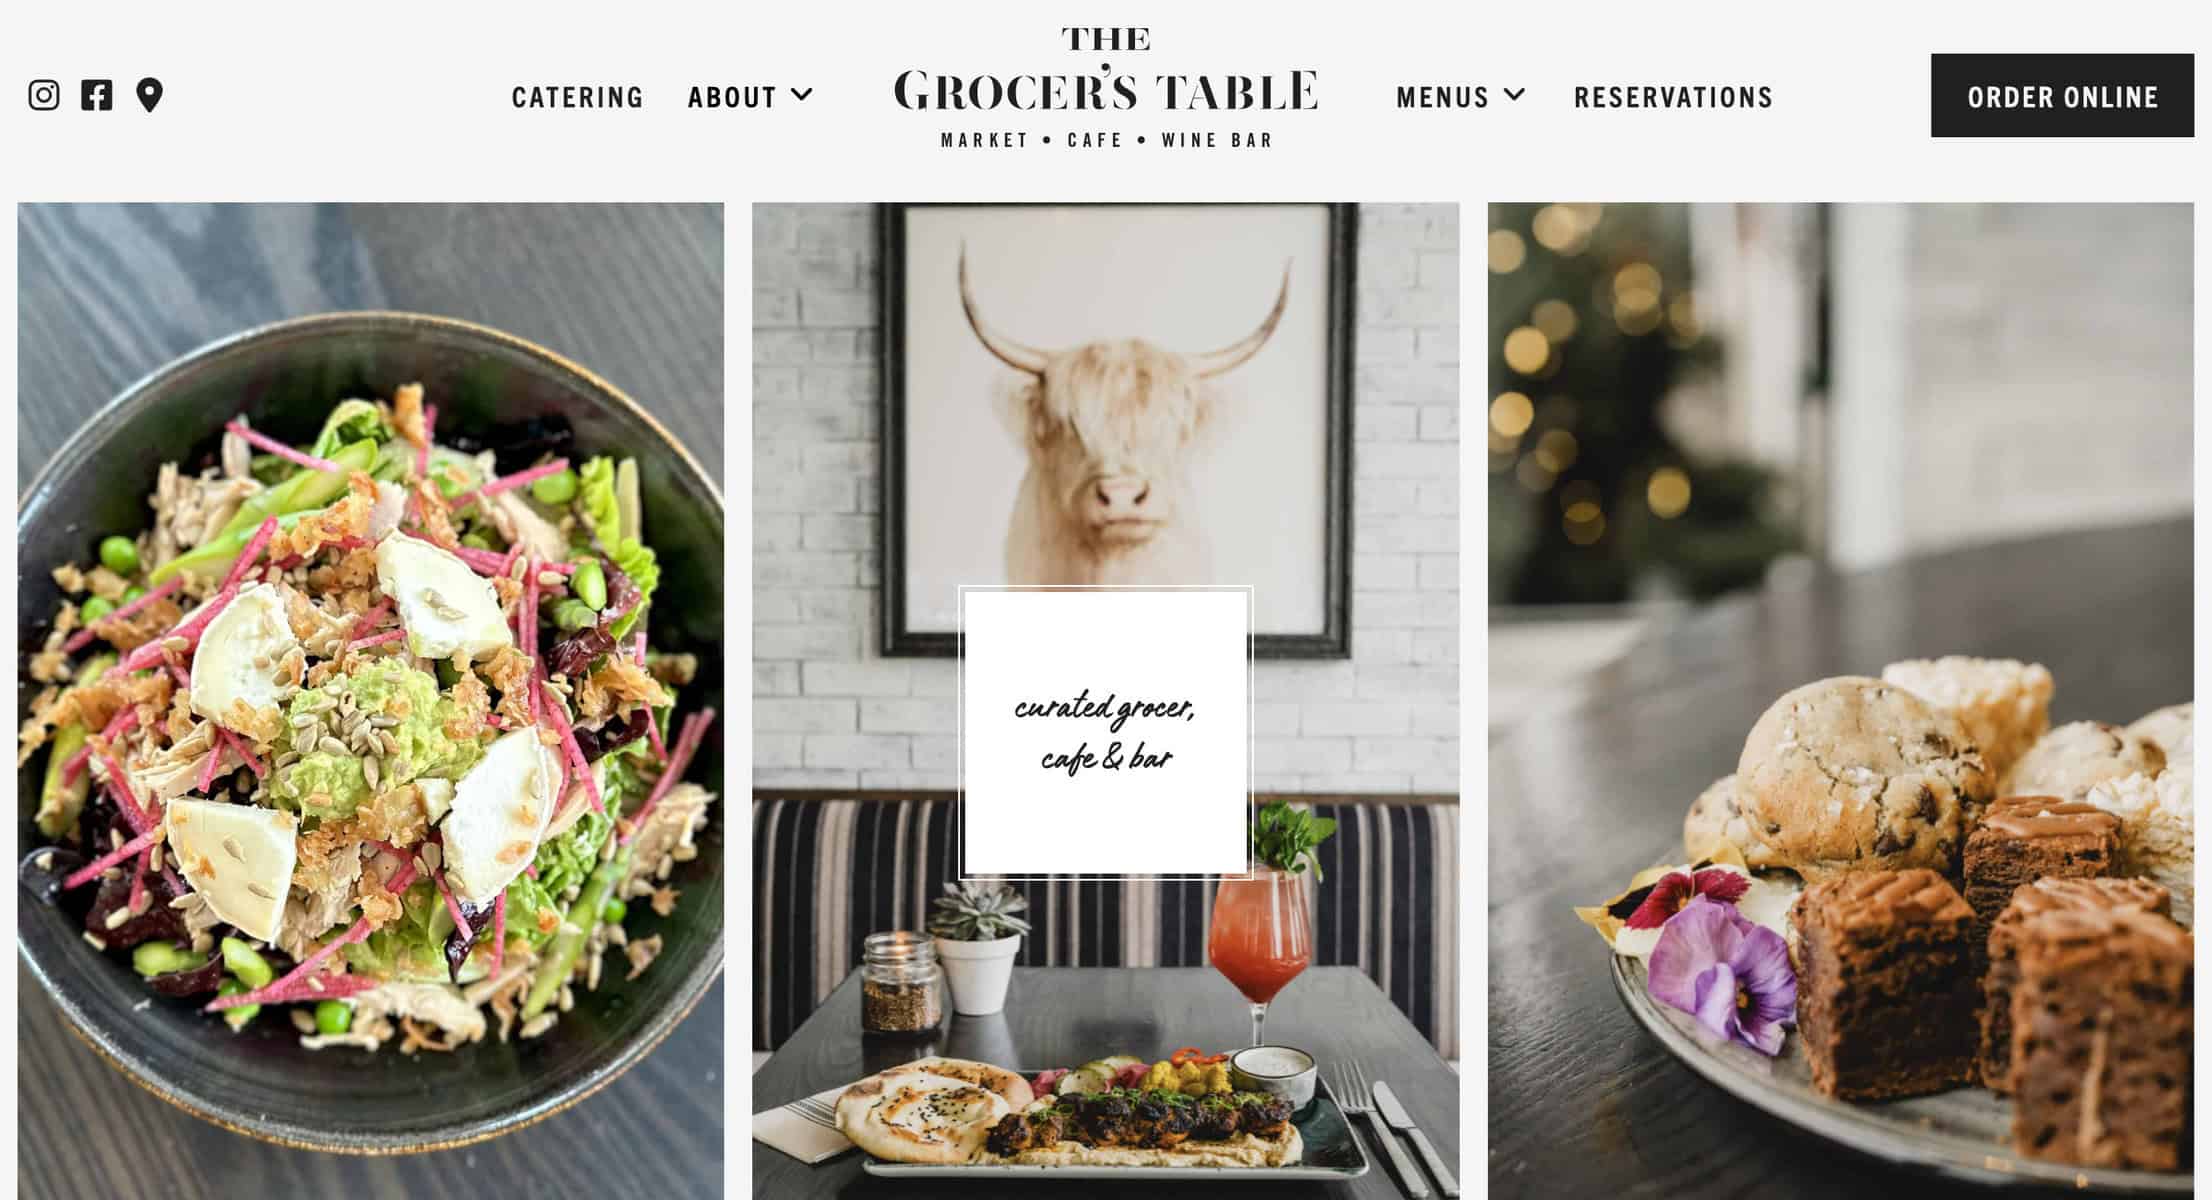 Screenshot of The Grocer’s Table Website